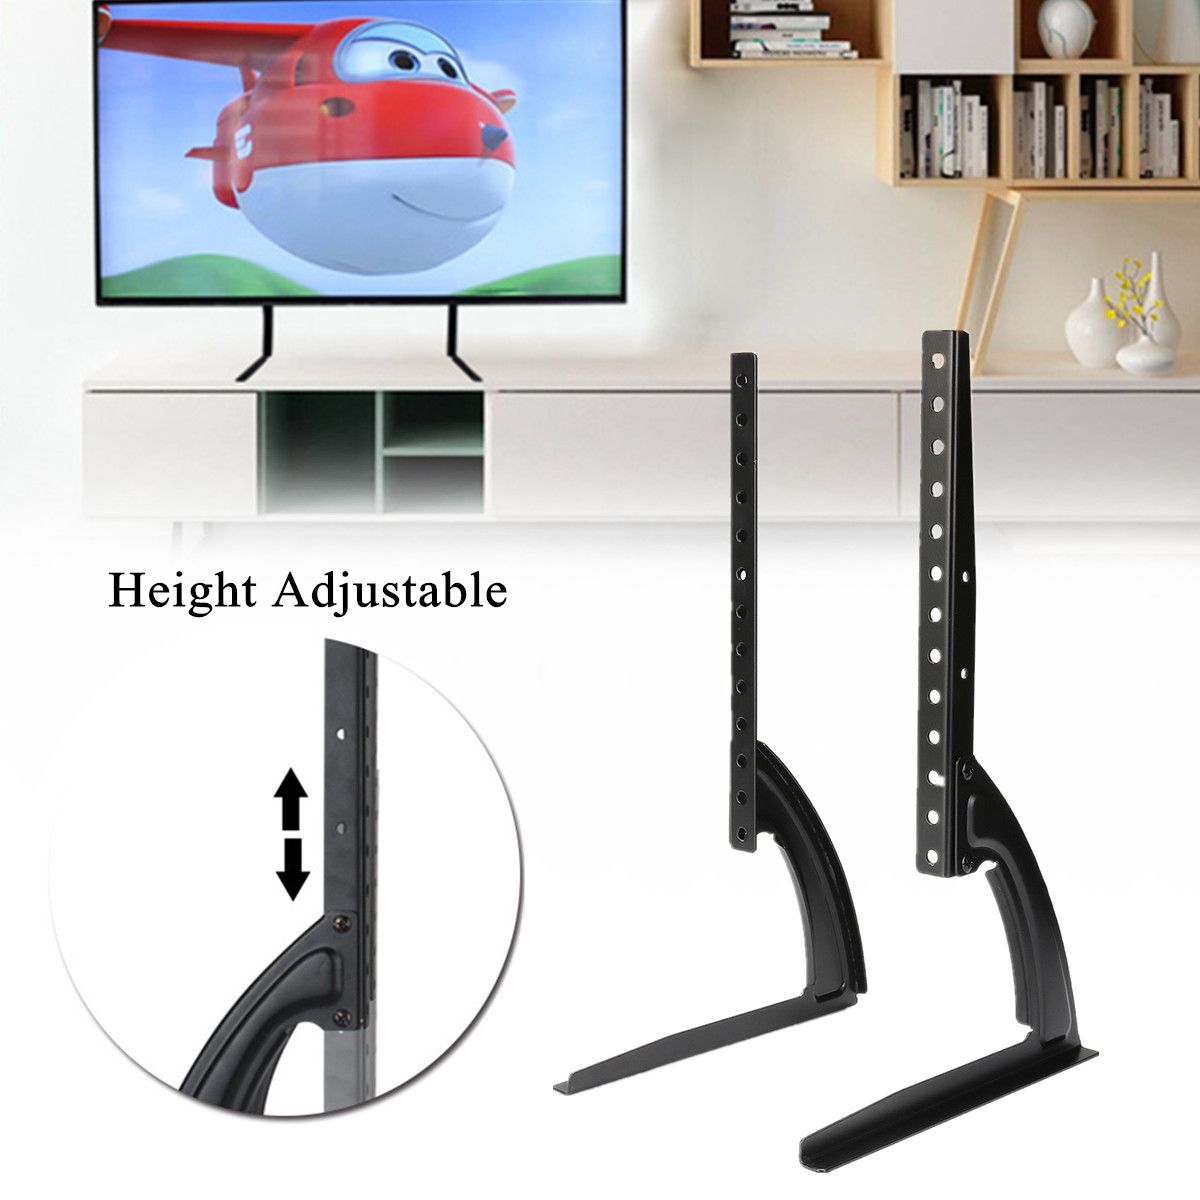 Universal-Table-Top-TV-Stand-Legs-for-LED-LCD-Plasma-Flat-Screen-TV-26-65inch-1299704